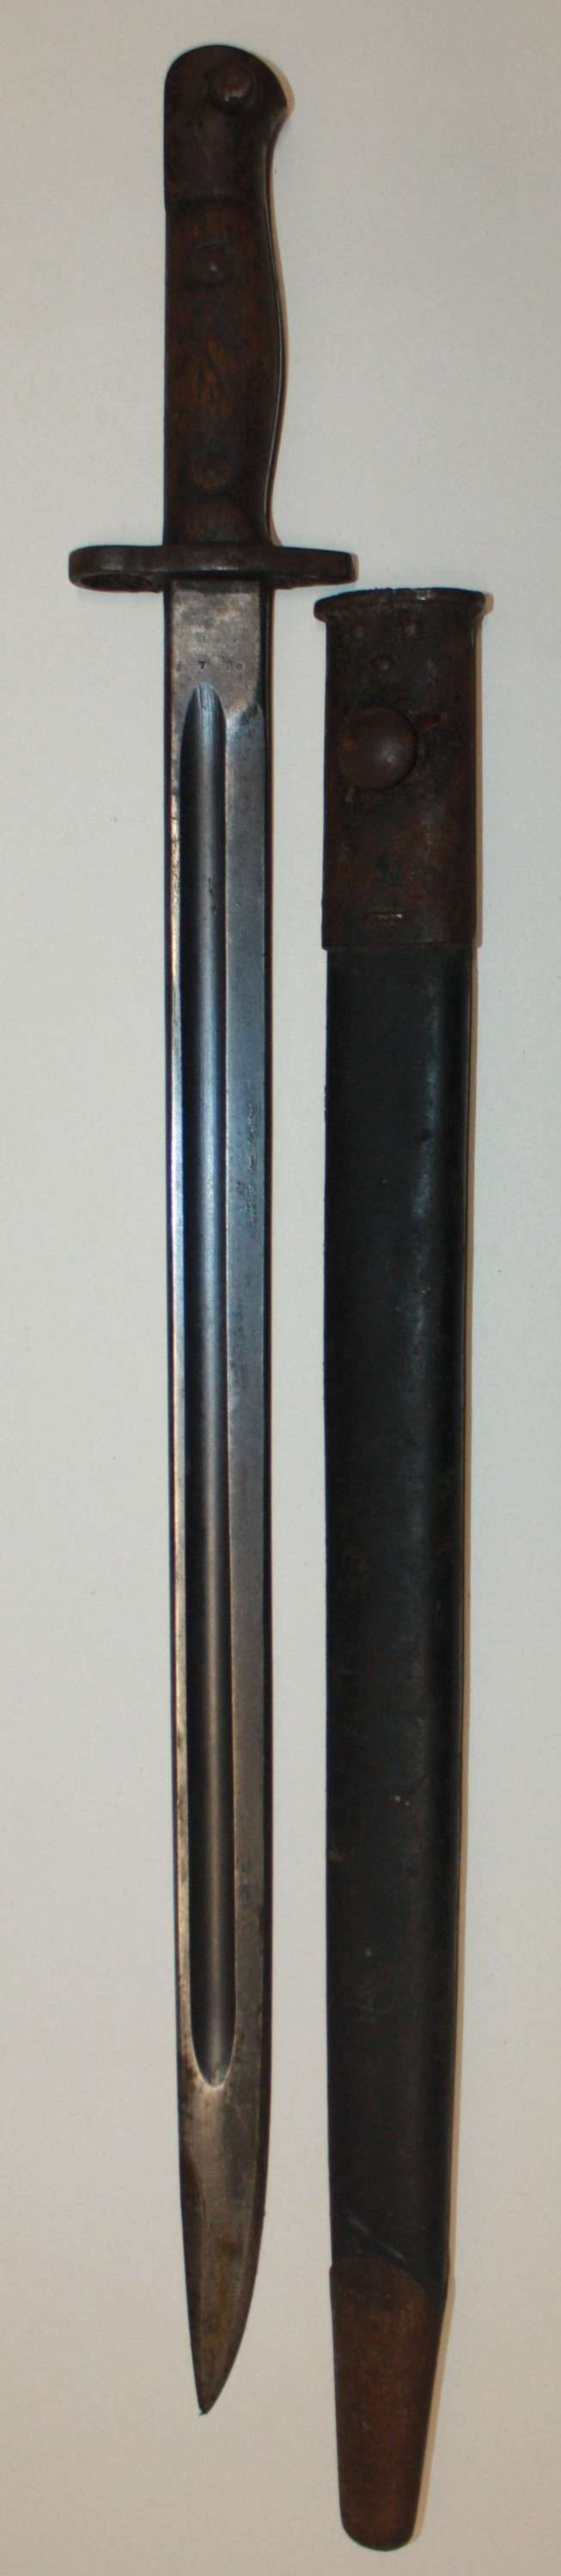 A GOOD USED EXAMPLE OF THE AUSTRALIAN MADE 07 PATTERN BAYONET LITHGOW